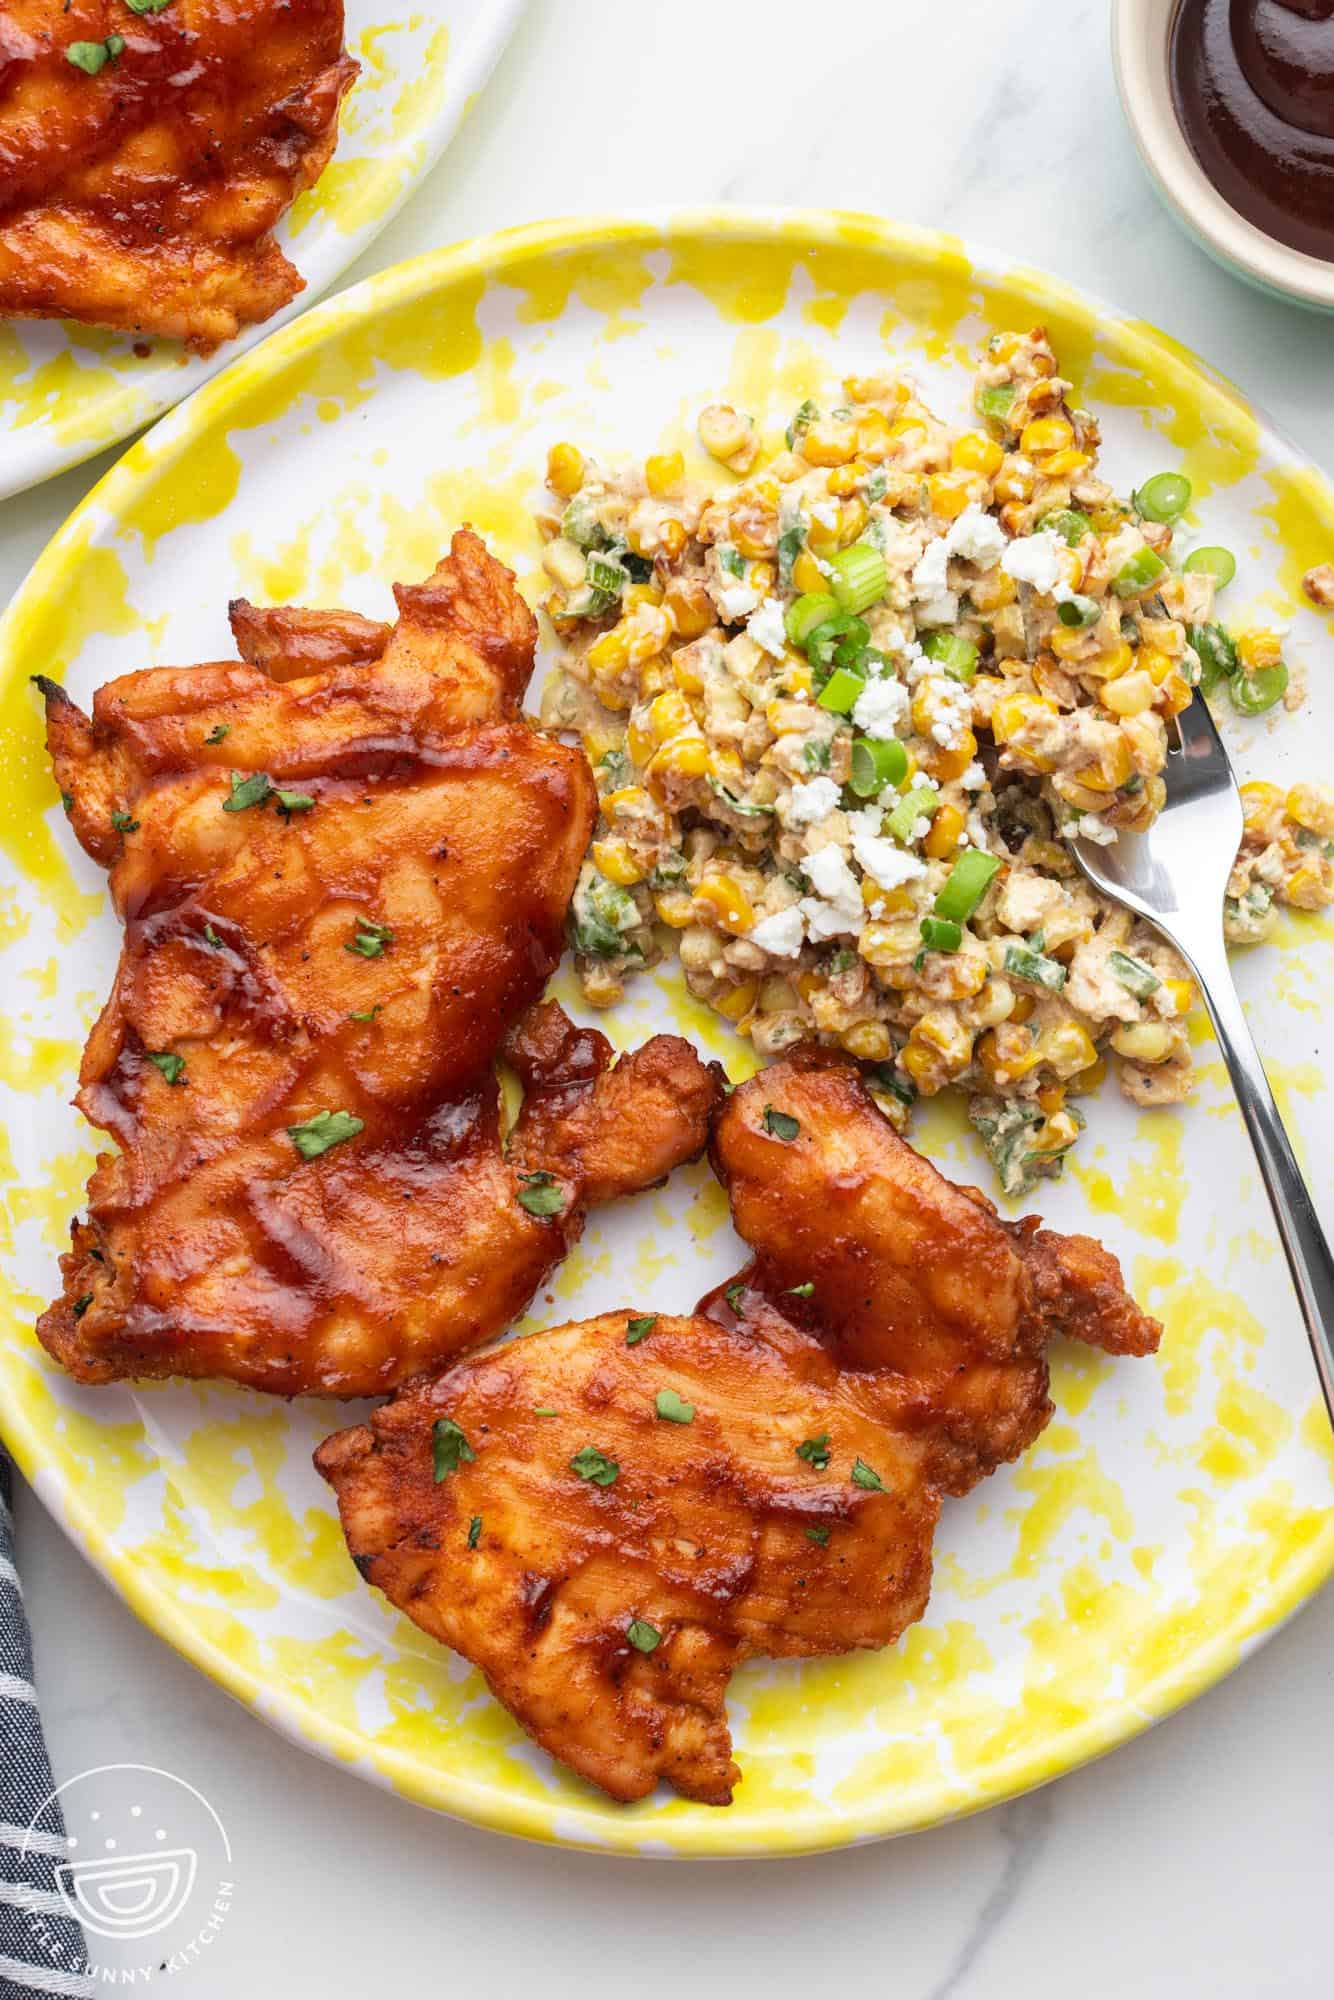 A dinner plate of two bbq chicken thighs and a side of corn salad.